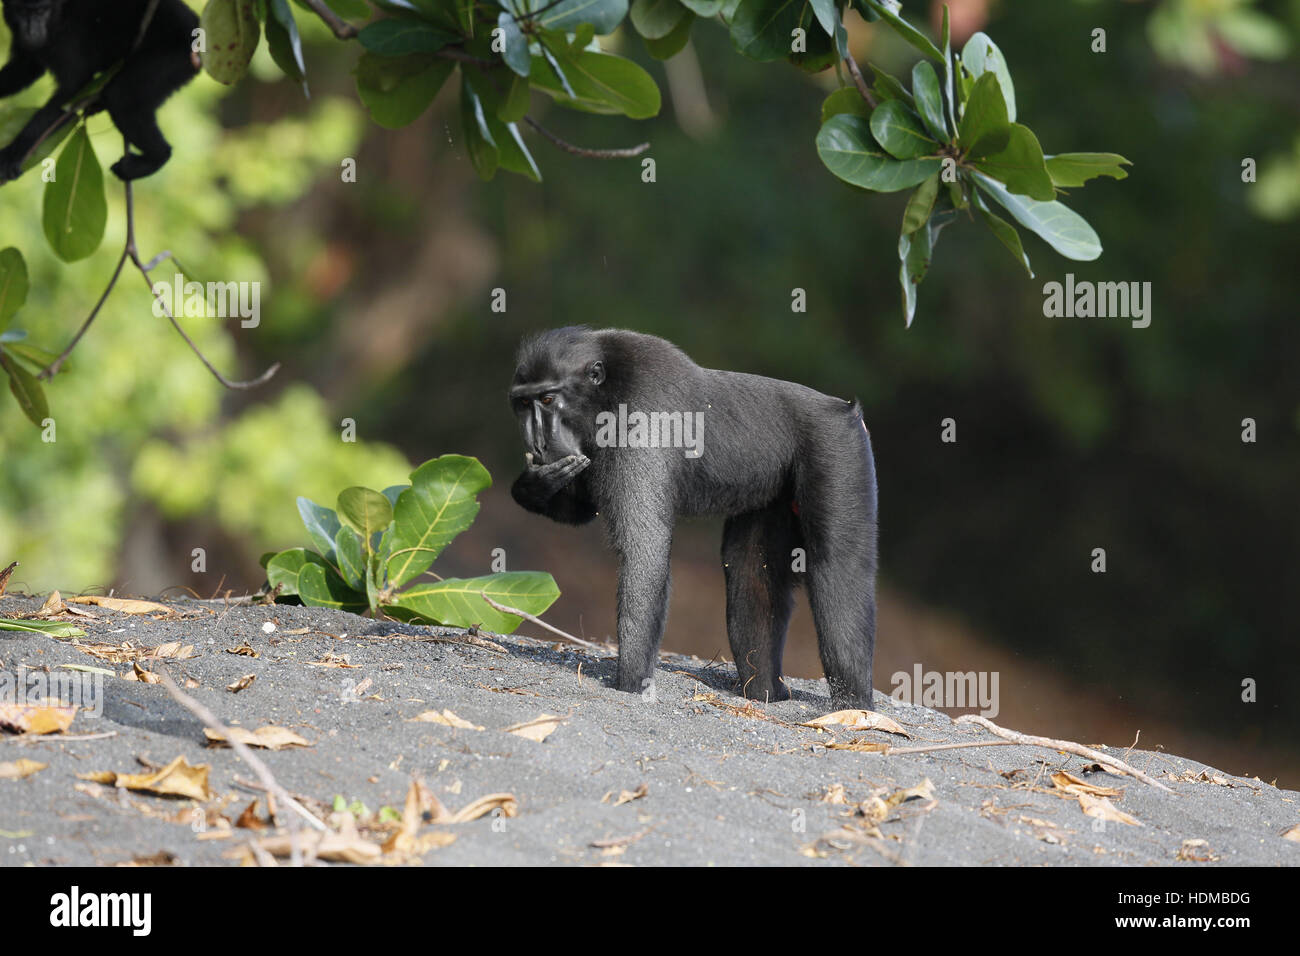 Celebes Crested Macaque, Macaca nigra, eating at black sand beach Stock Photo